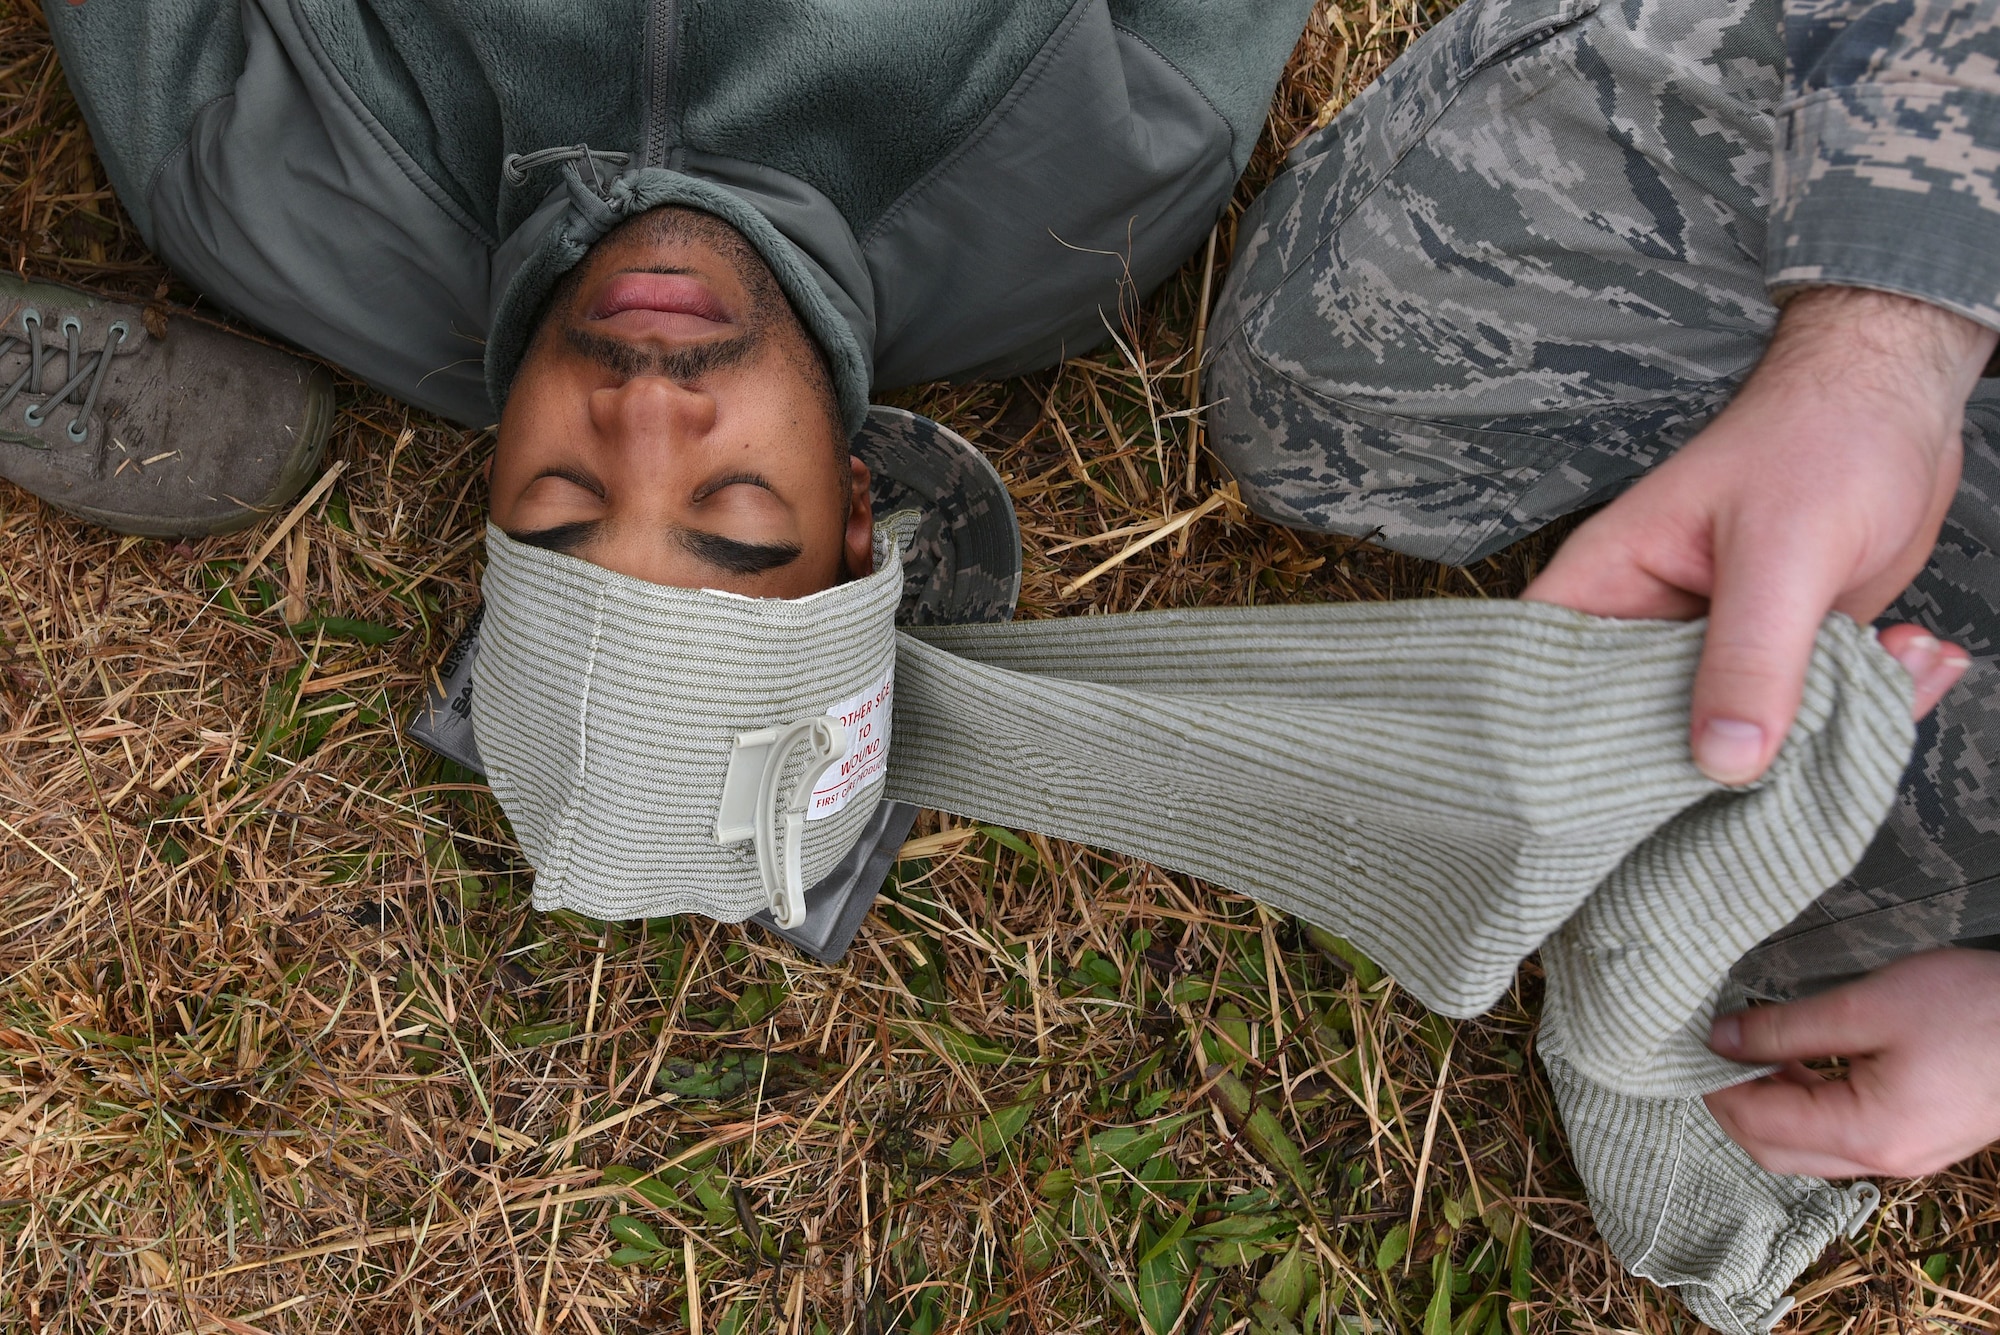 U.S. Air Force Senior Airman Nelson Blackshear, 20th Civil Engineer Squadron administrative journeyman, lies on the ground as his head is bandaged during self-aid buddy care (SABC) training at Poinsett Electronic Combat Range near Wedgefield, S.C., Dec. 5, 2017.